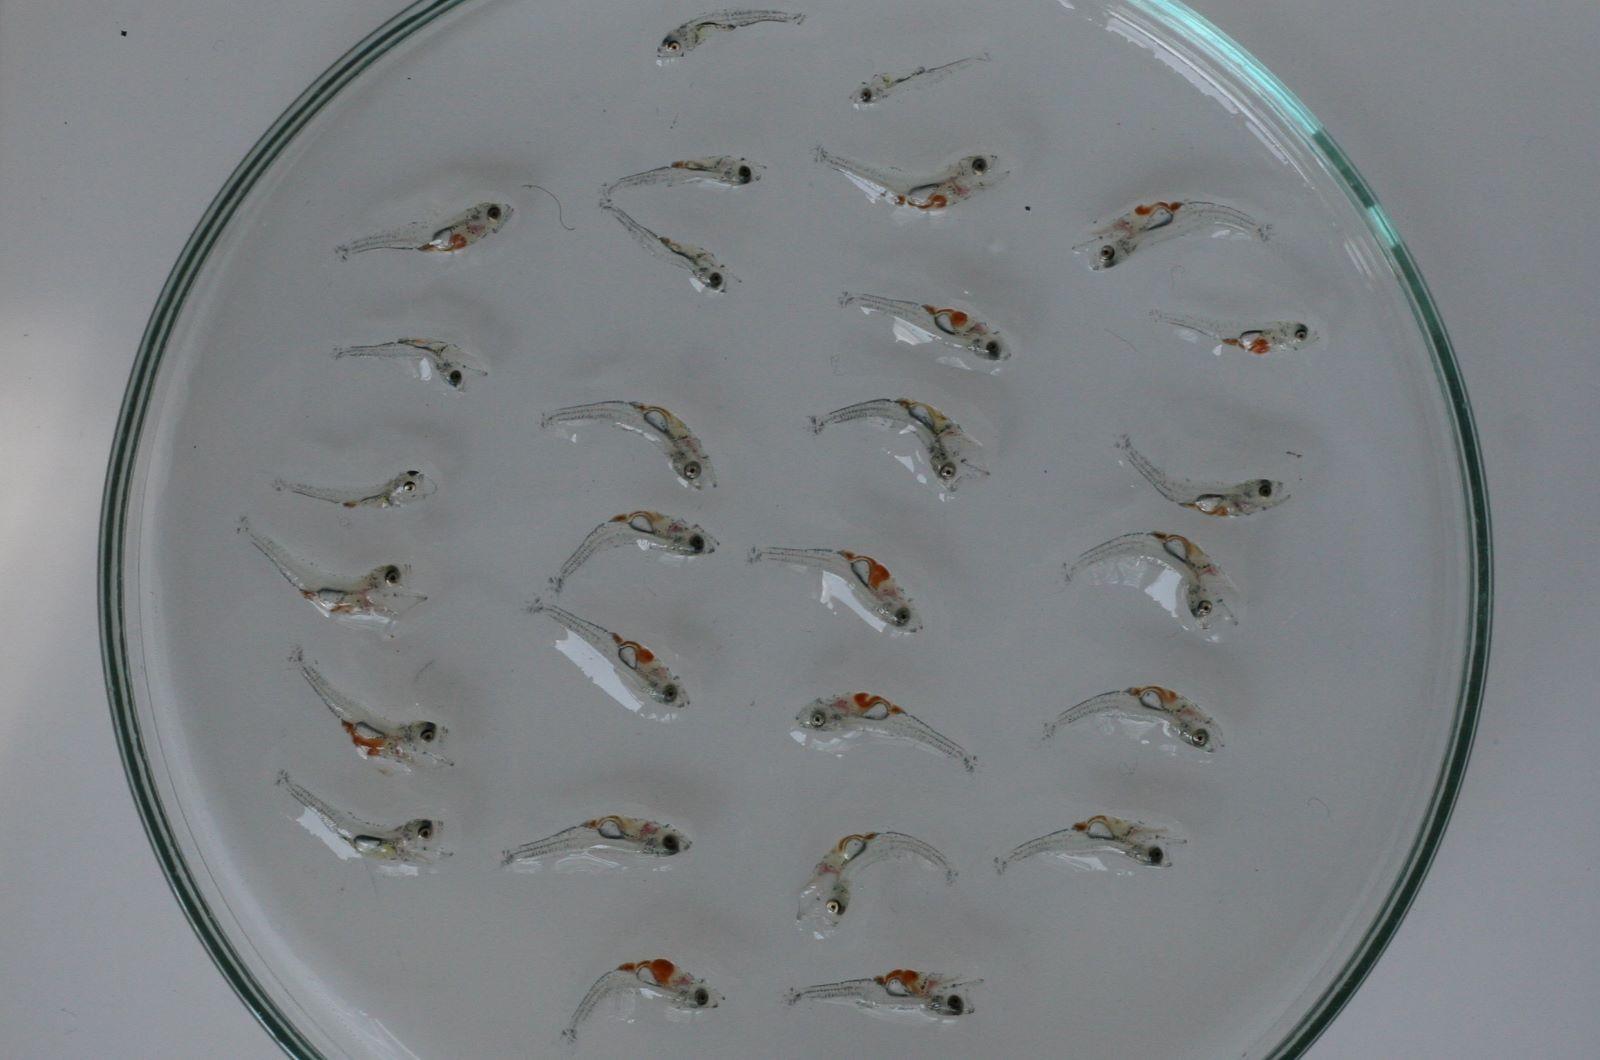 pikeperch fry in a petri dish